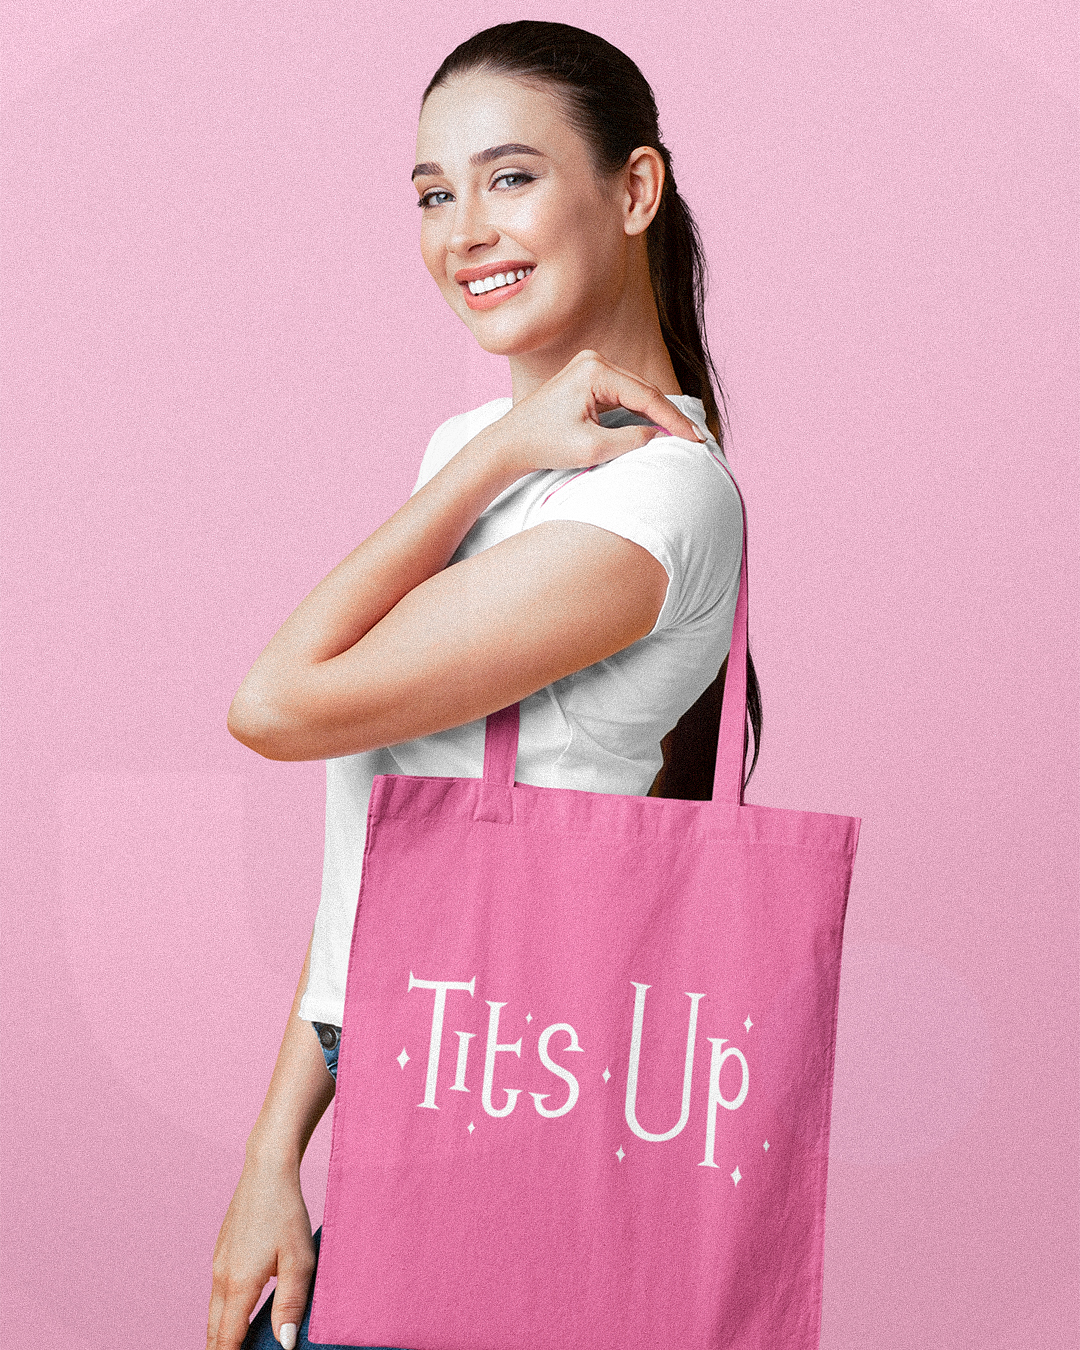 Tits Up Tote Bag - The Marvelous Mrs Maisel Inspired Tote Bag - Mrs Maisel Tits Up Tote Bag - Tits Up Mrs Maisel Inspired Tote Bag